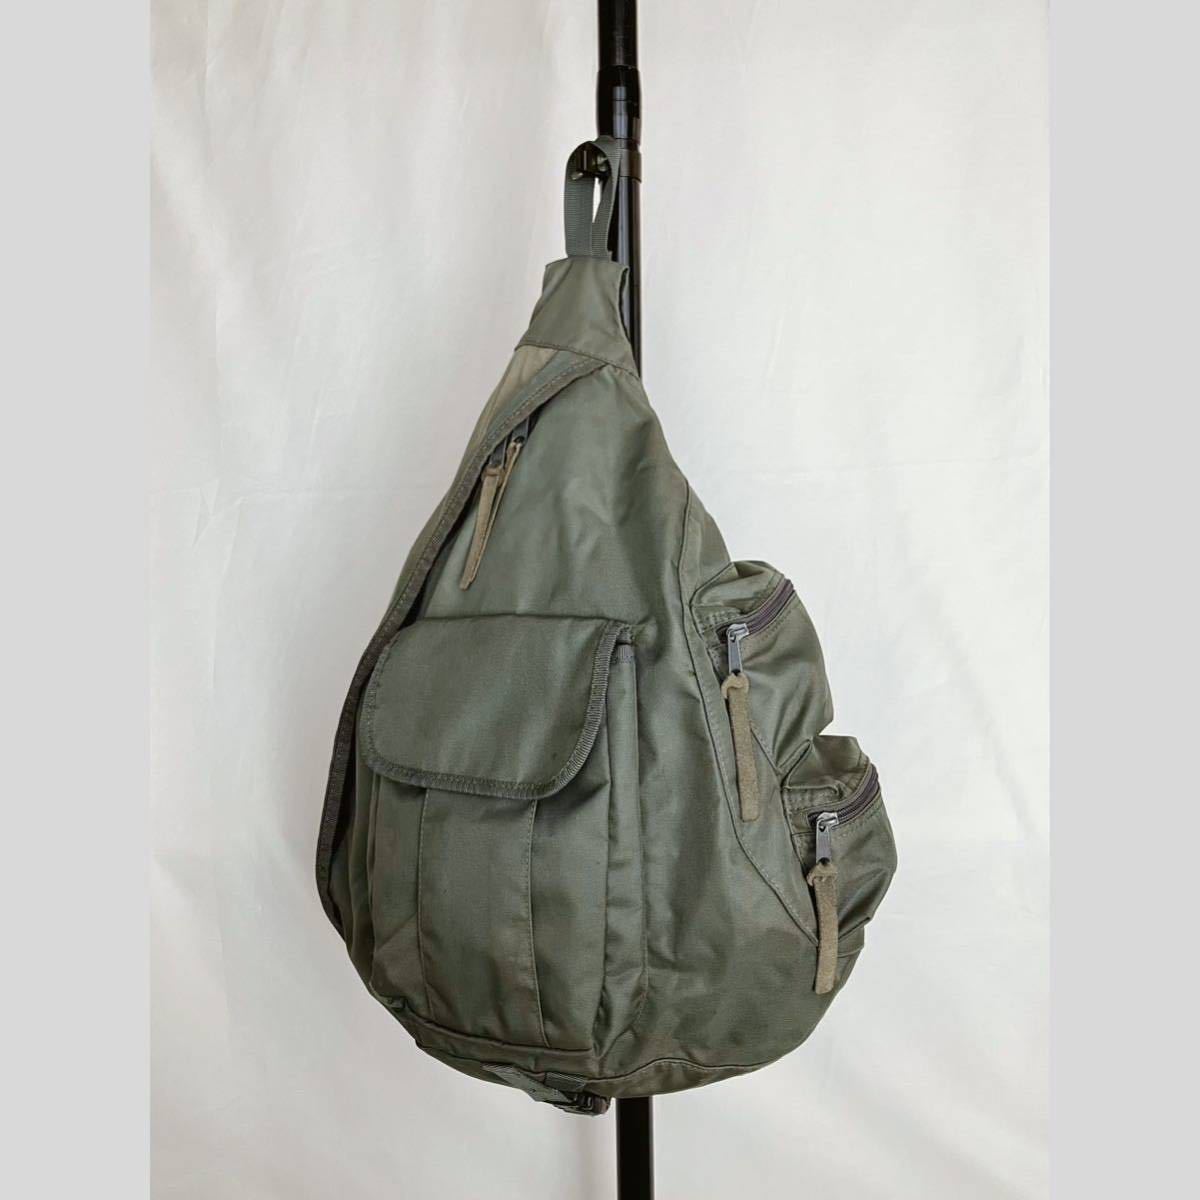 00s GAP Sling Bag ボディバッグarmy green ミリタリーy2k 90s old